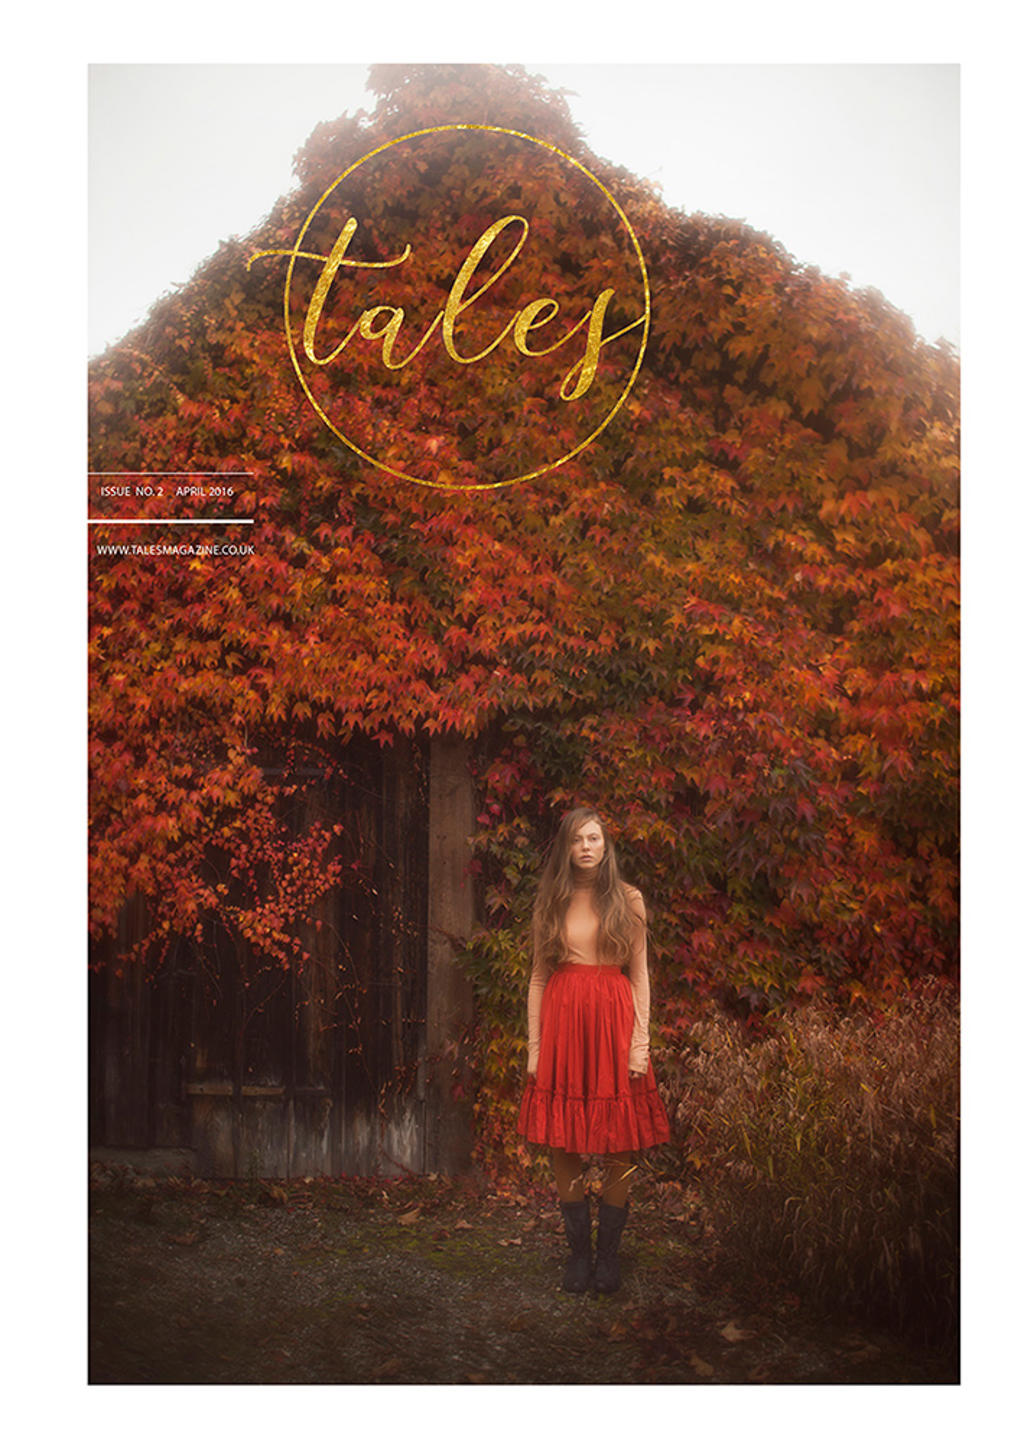 Editorials - Selected works.Tales Magazine #2 - The Explorer Issue - Maya